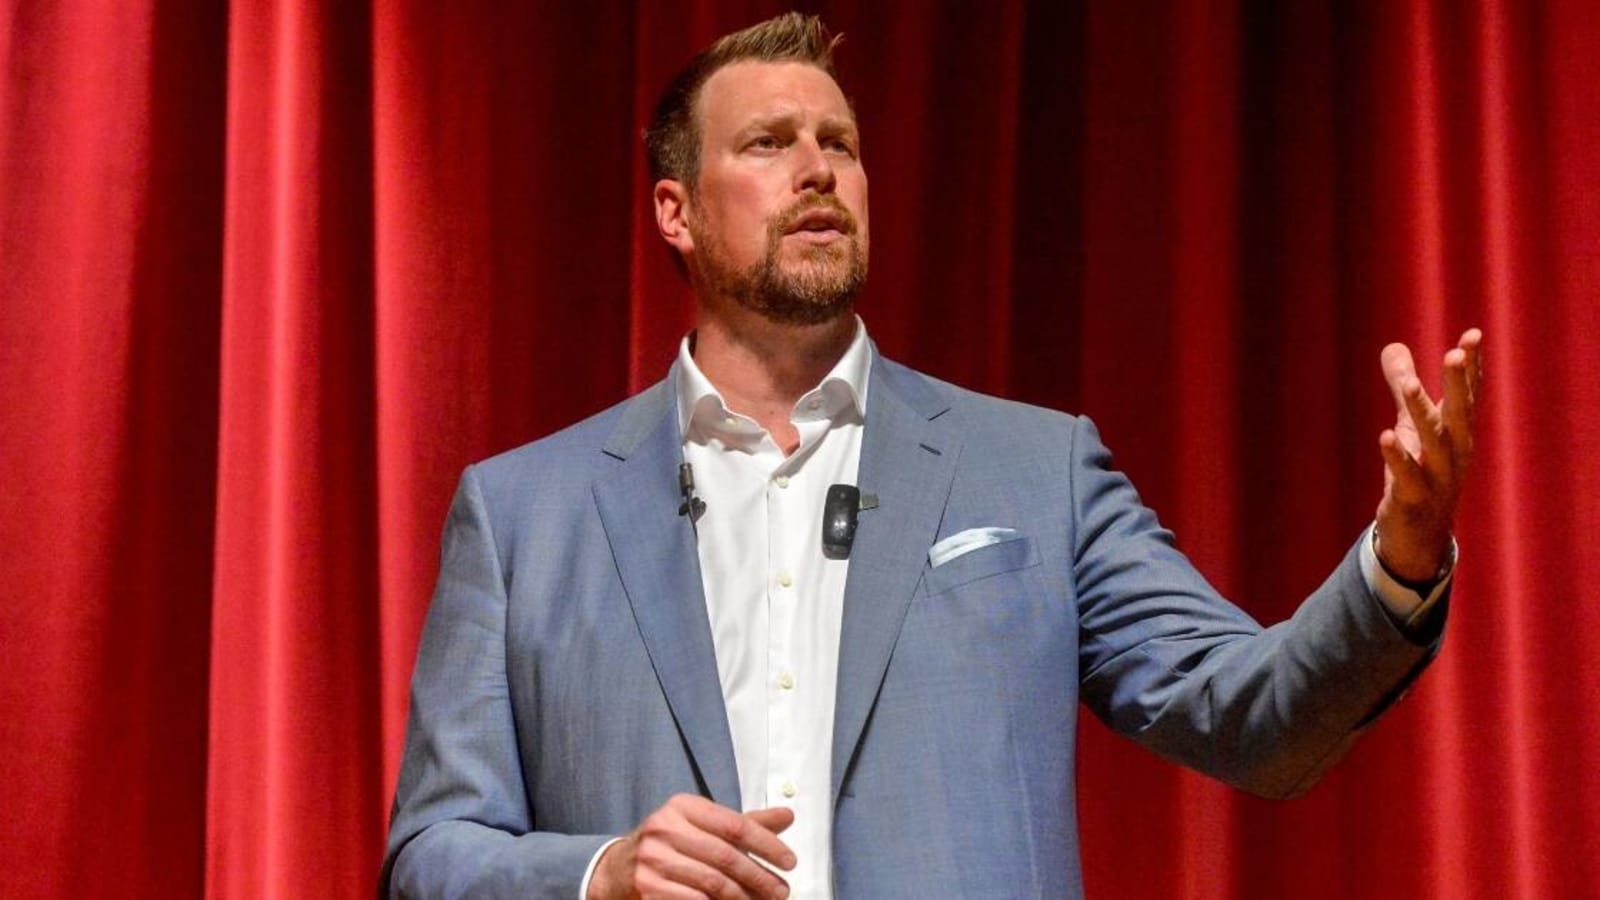 Ryan Leaf offers words of inspiration to Missouri football